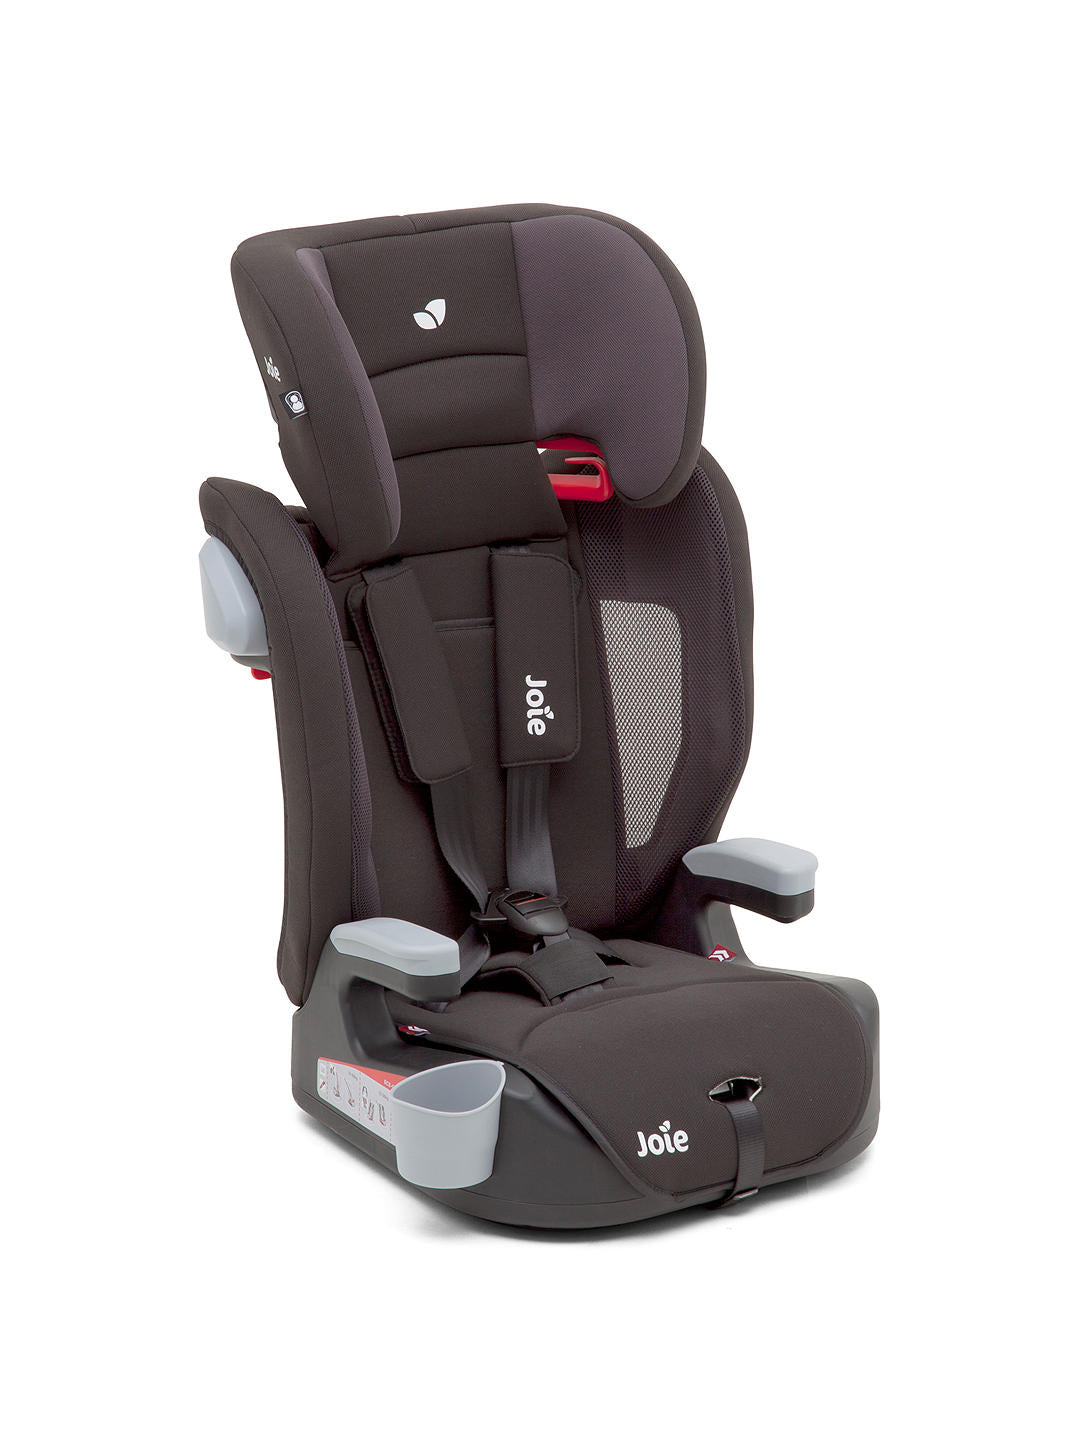 Joie Baby Elevate Group 1/2/3 Child Car Seat